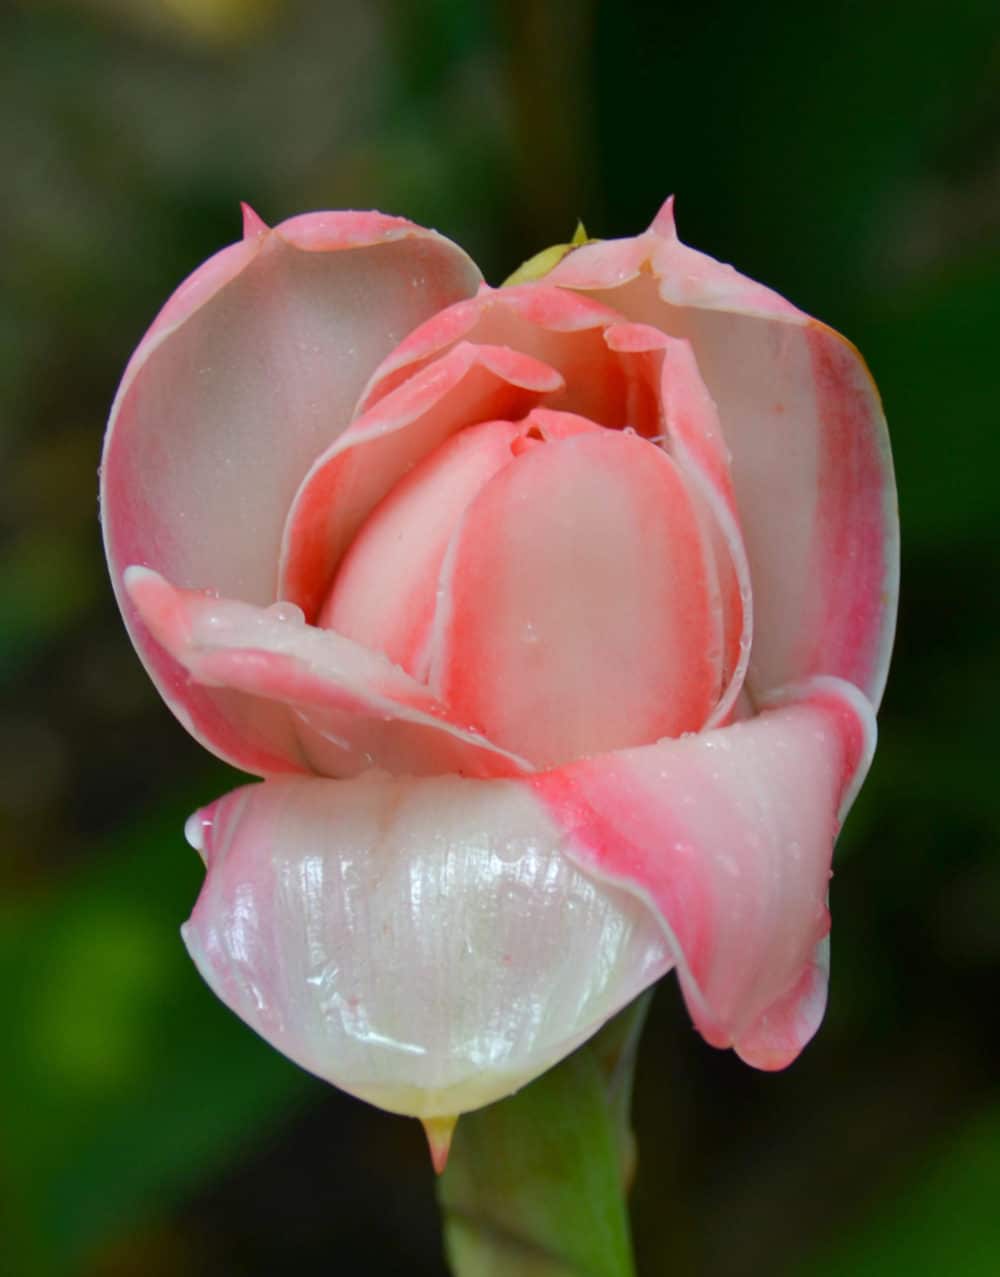 A Wax Rose in the Botanical Gardens in Soufriere, St. Lucia